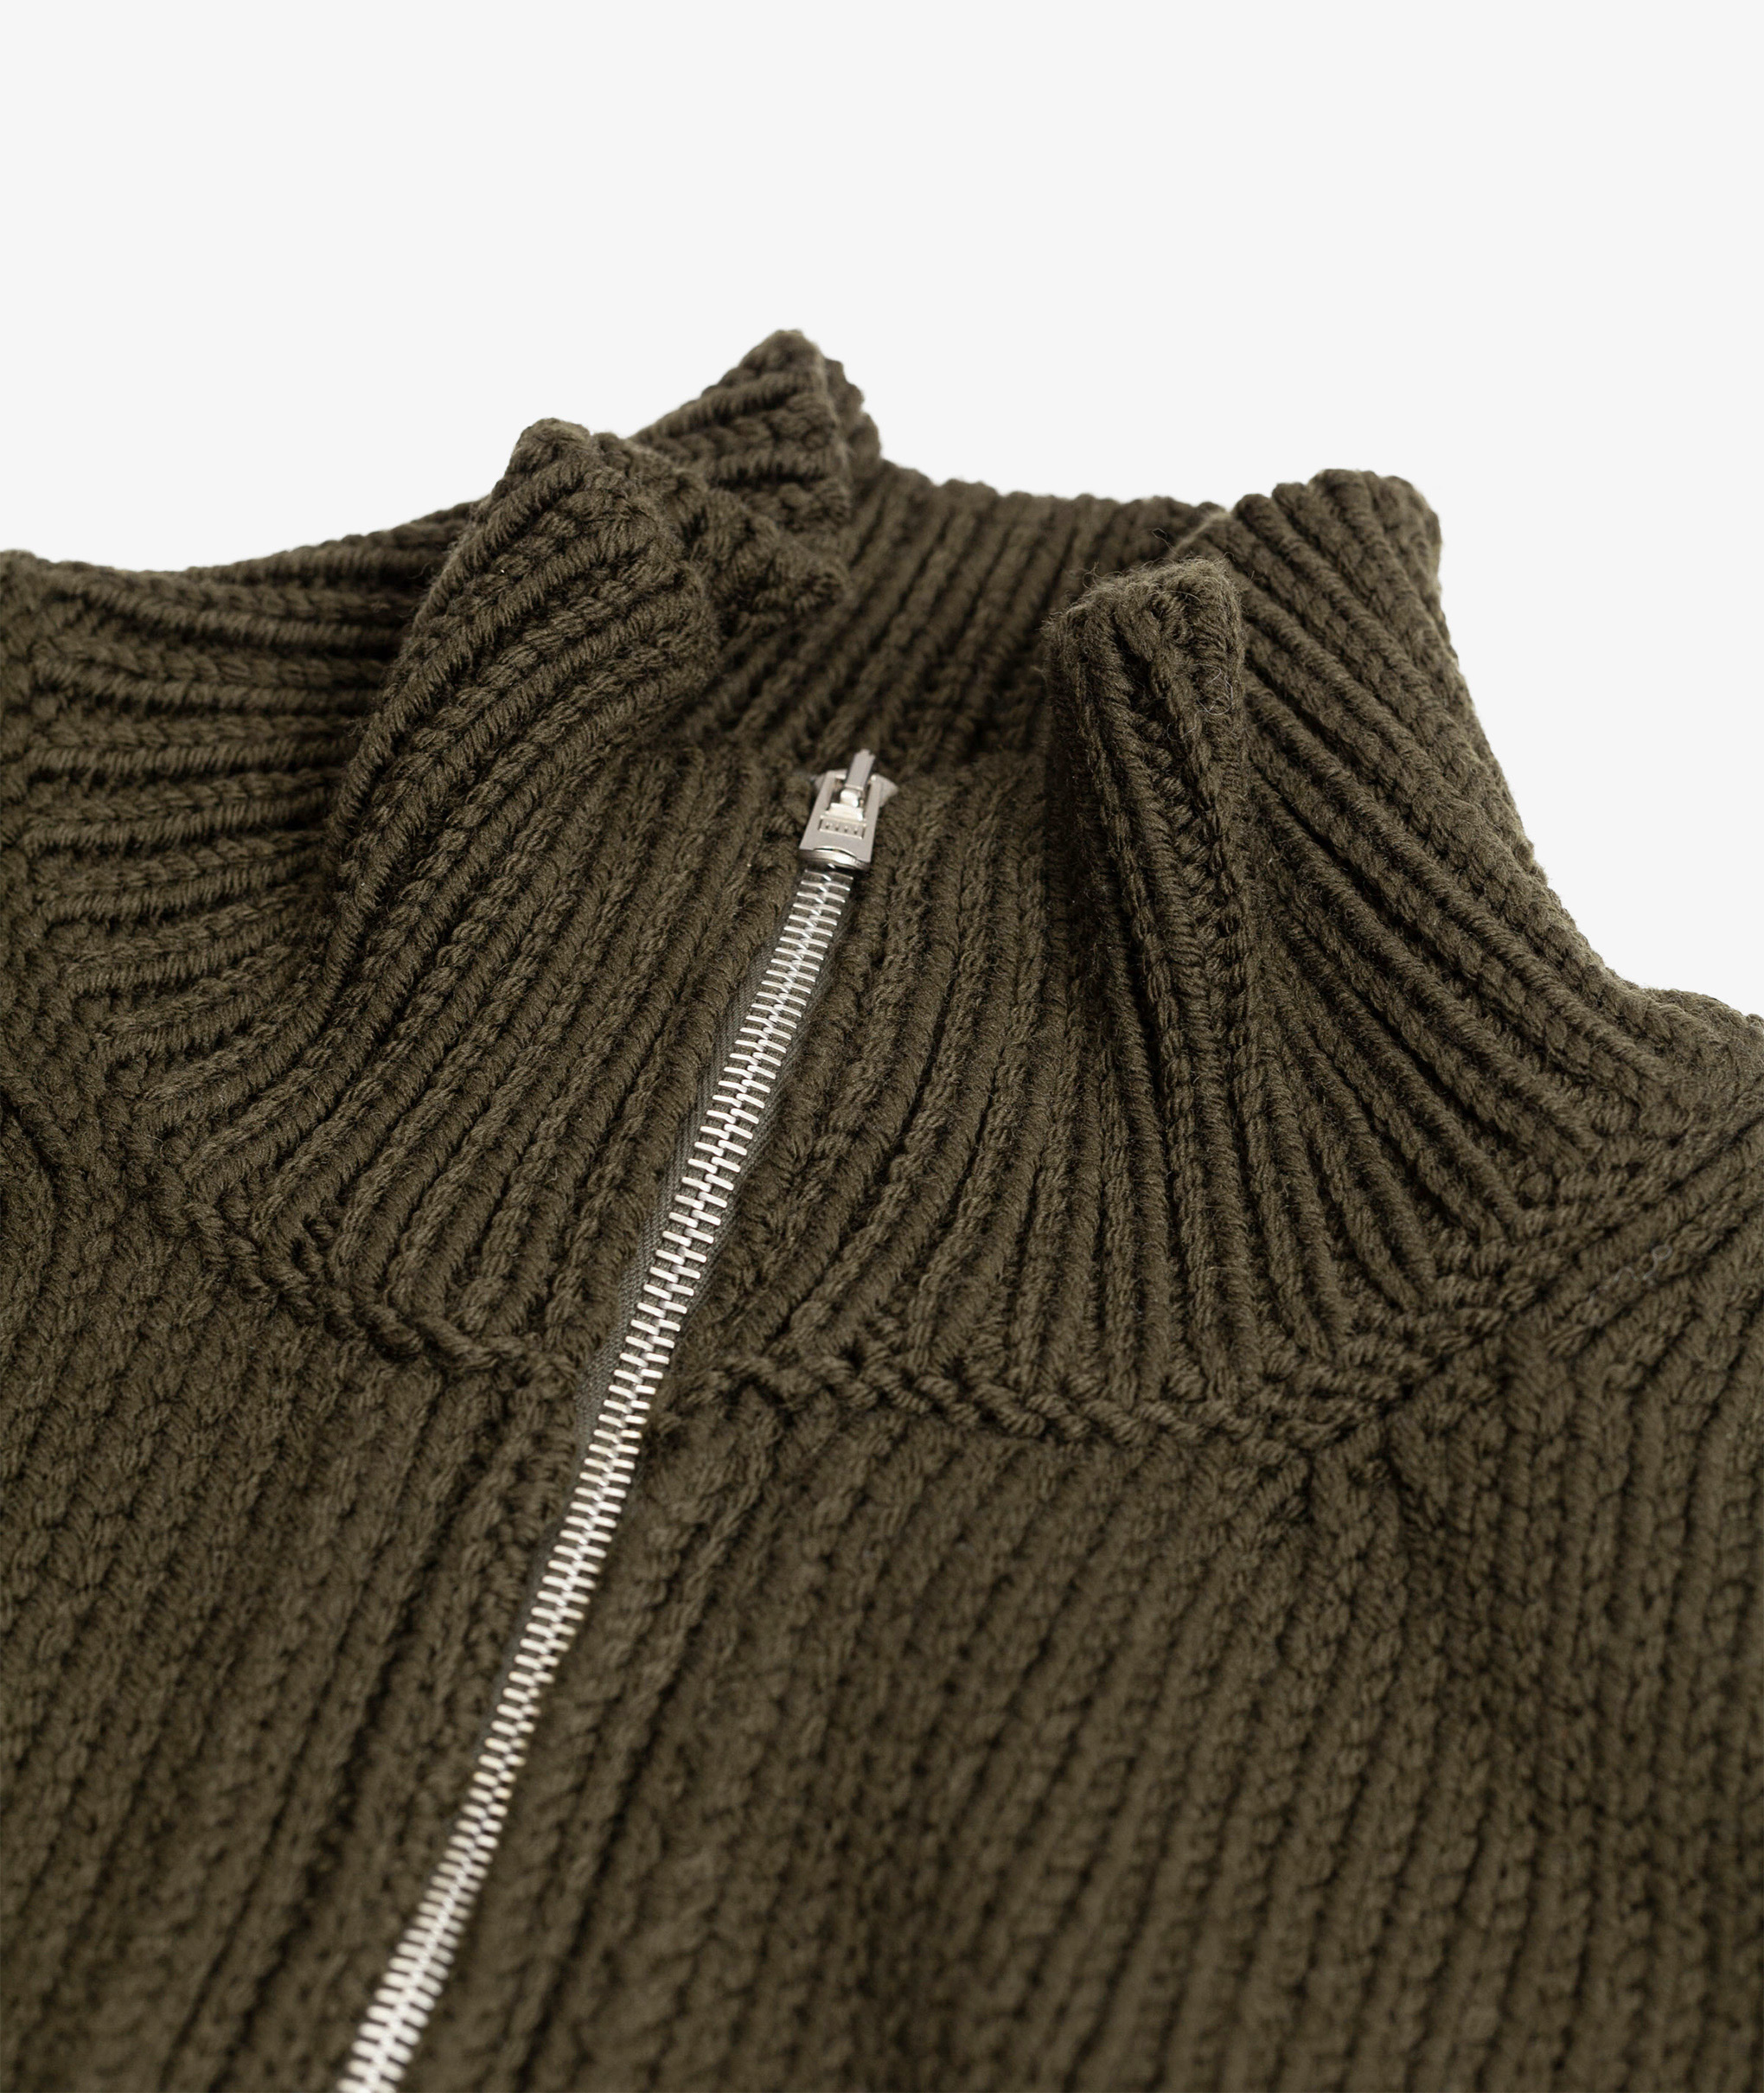 Norse Store | Shipping Worldwide - Margaret Howell Chunky Knit Zip